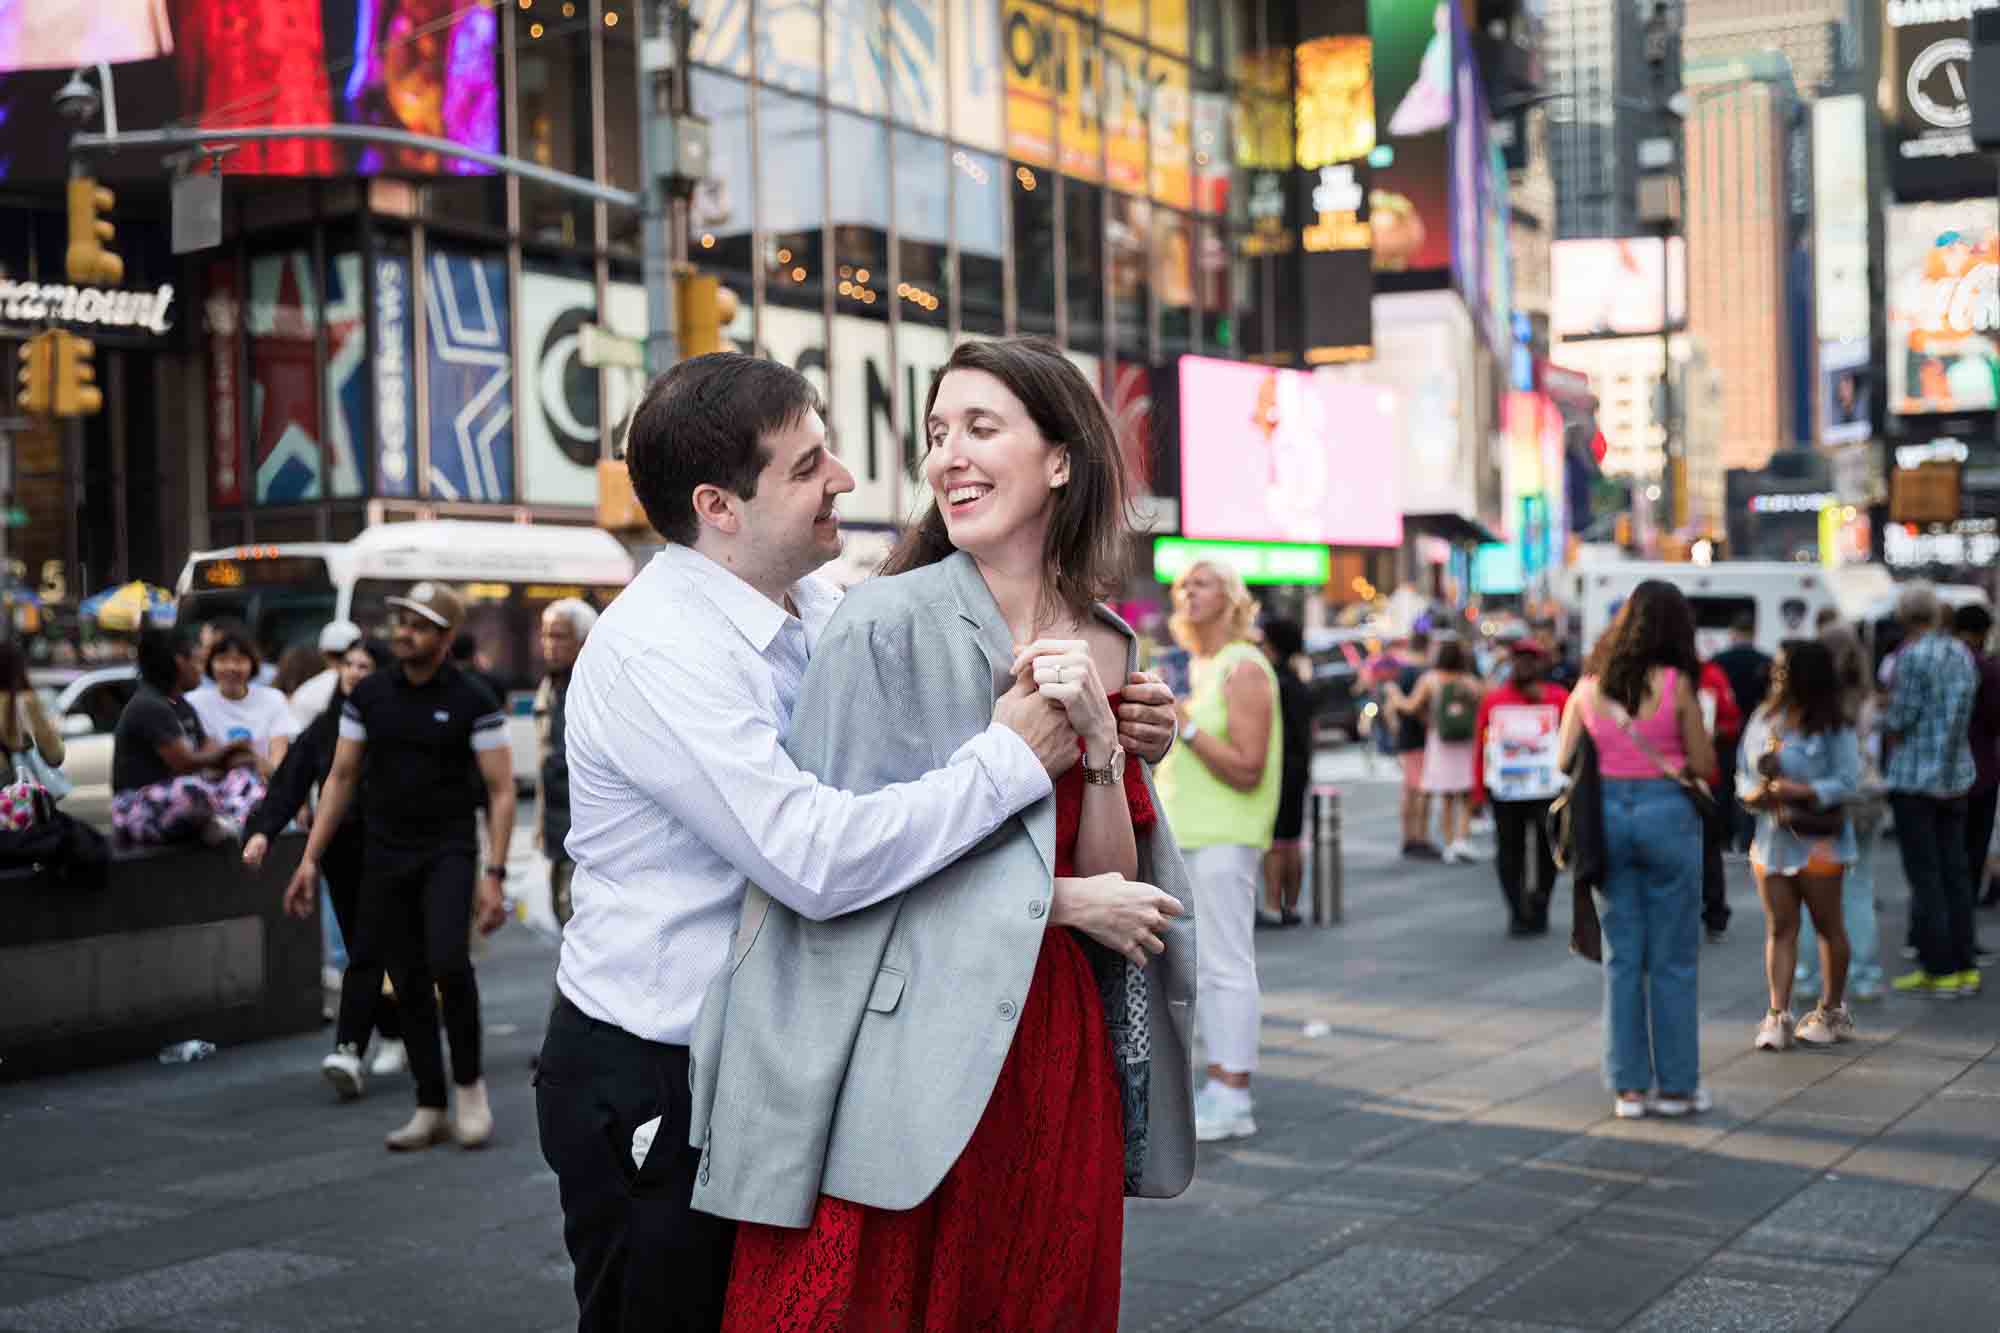 Man putting grey jacket over woman's shoulders in Times Square